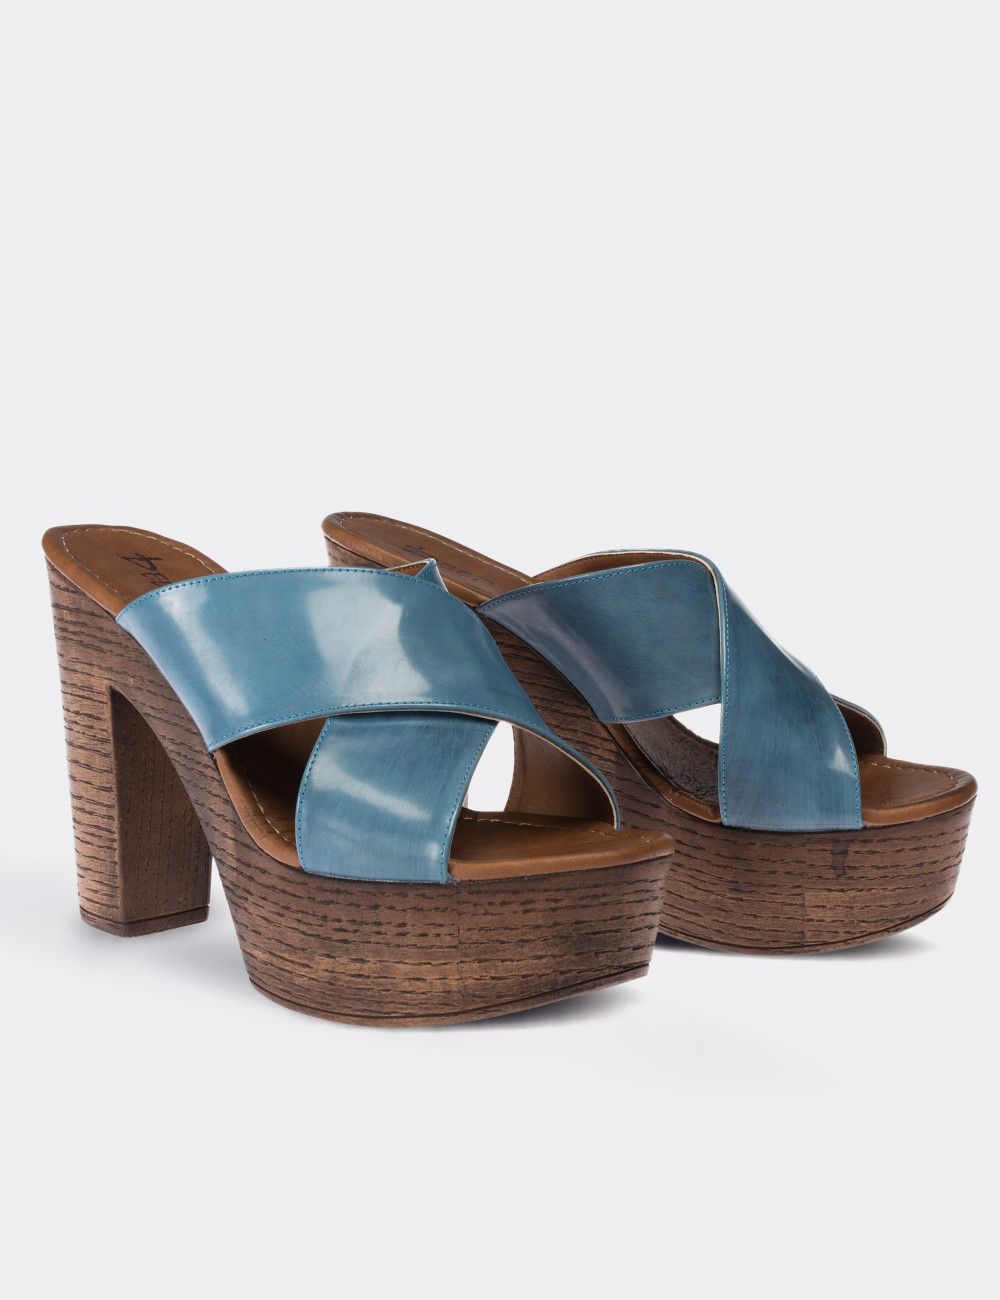 Blue  Leather Wedge Sandals - 02050ZMVIC01